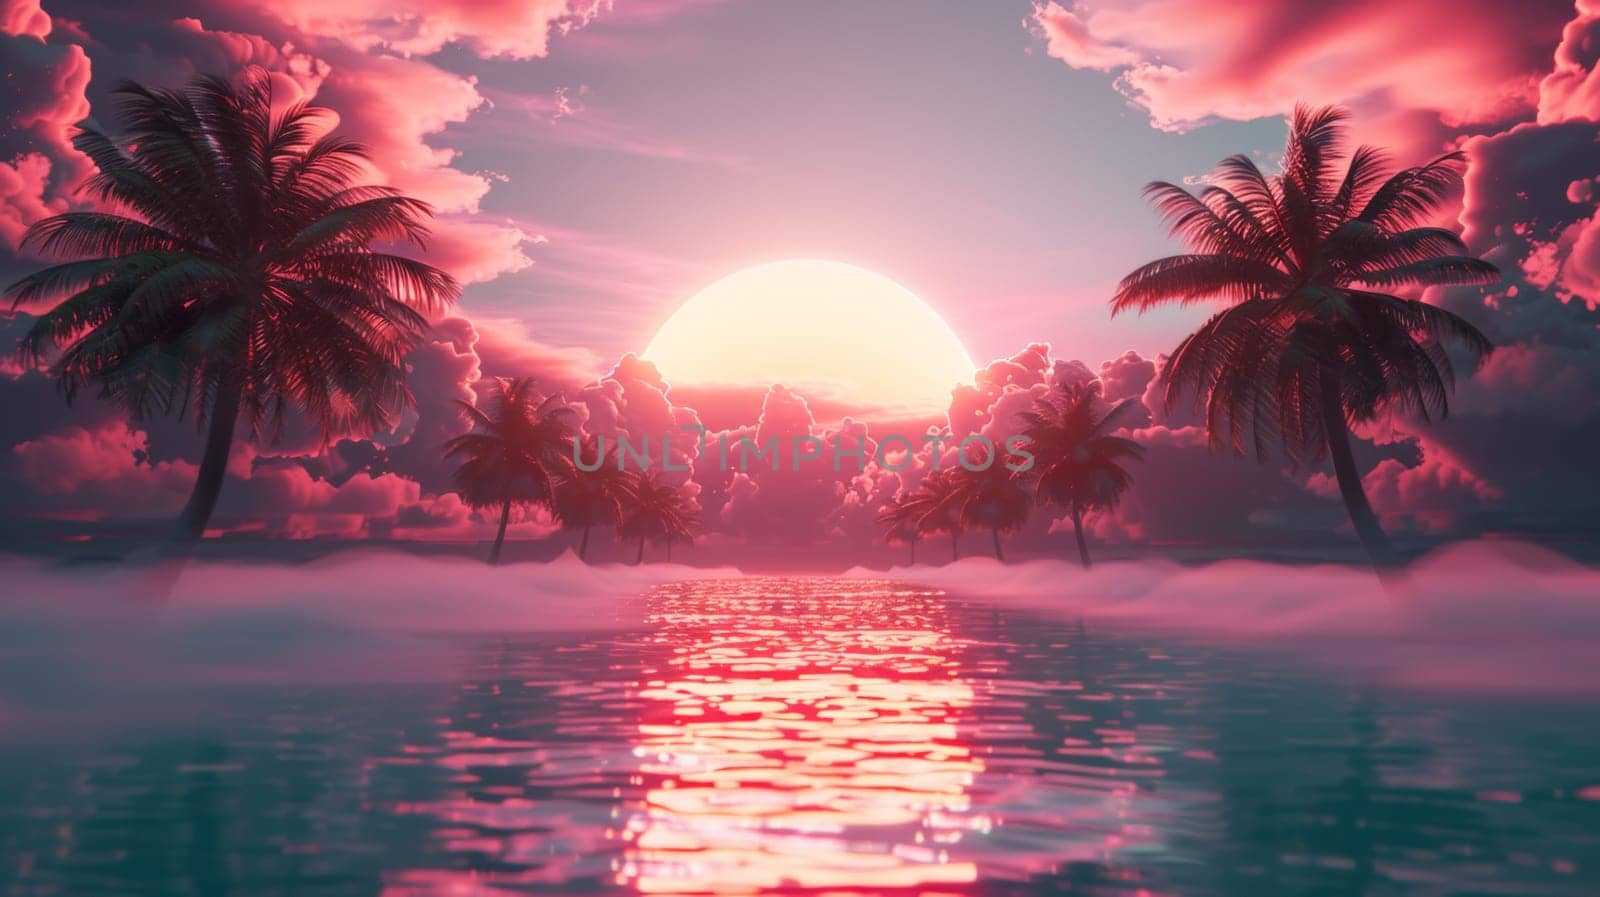 A sunset over a body of water with palm trees in the background